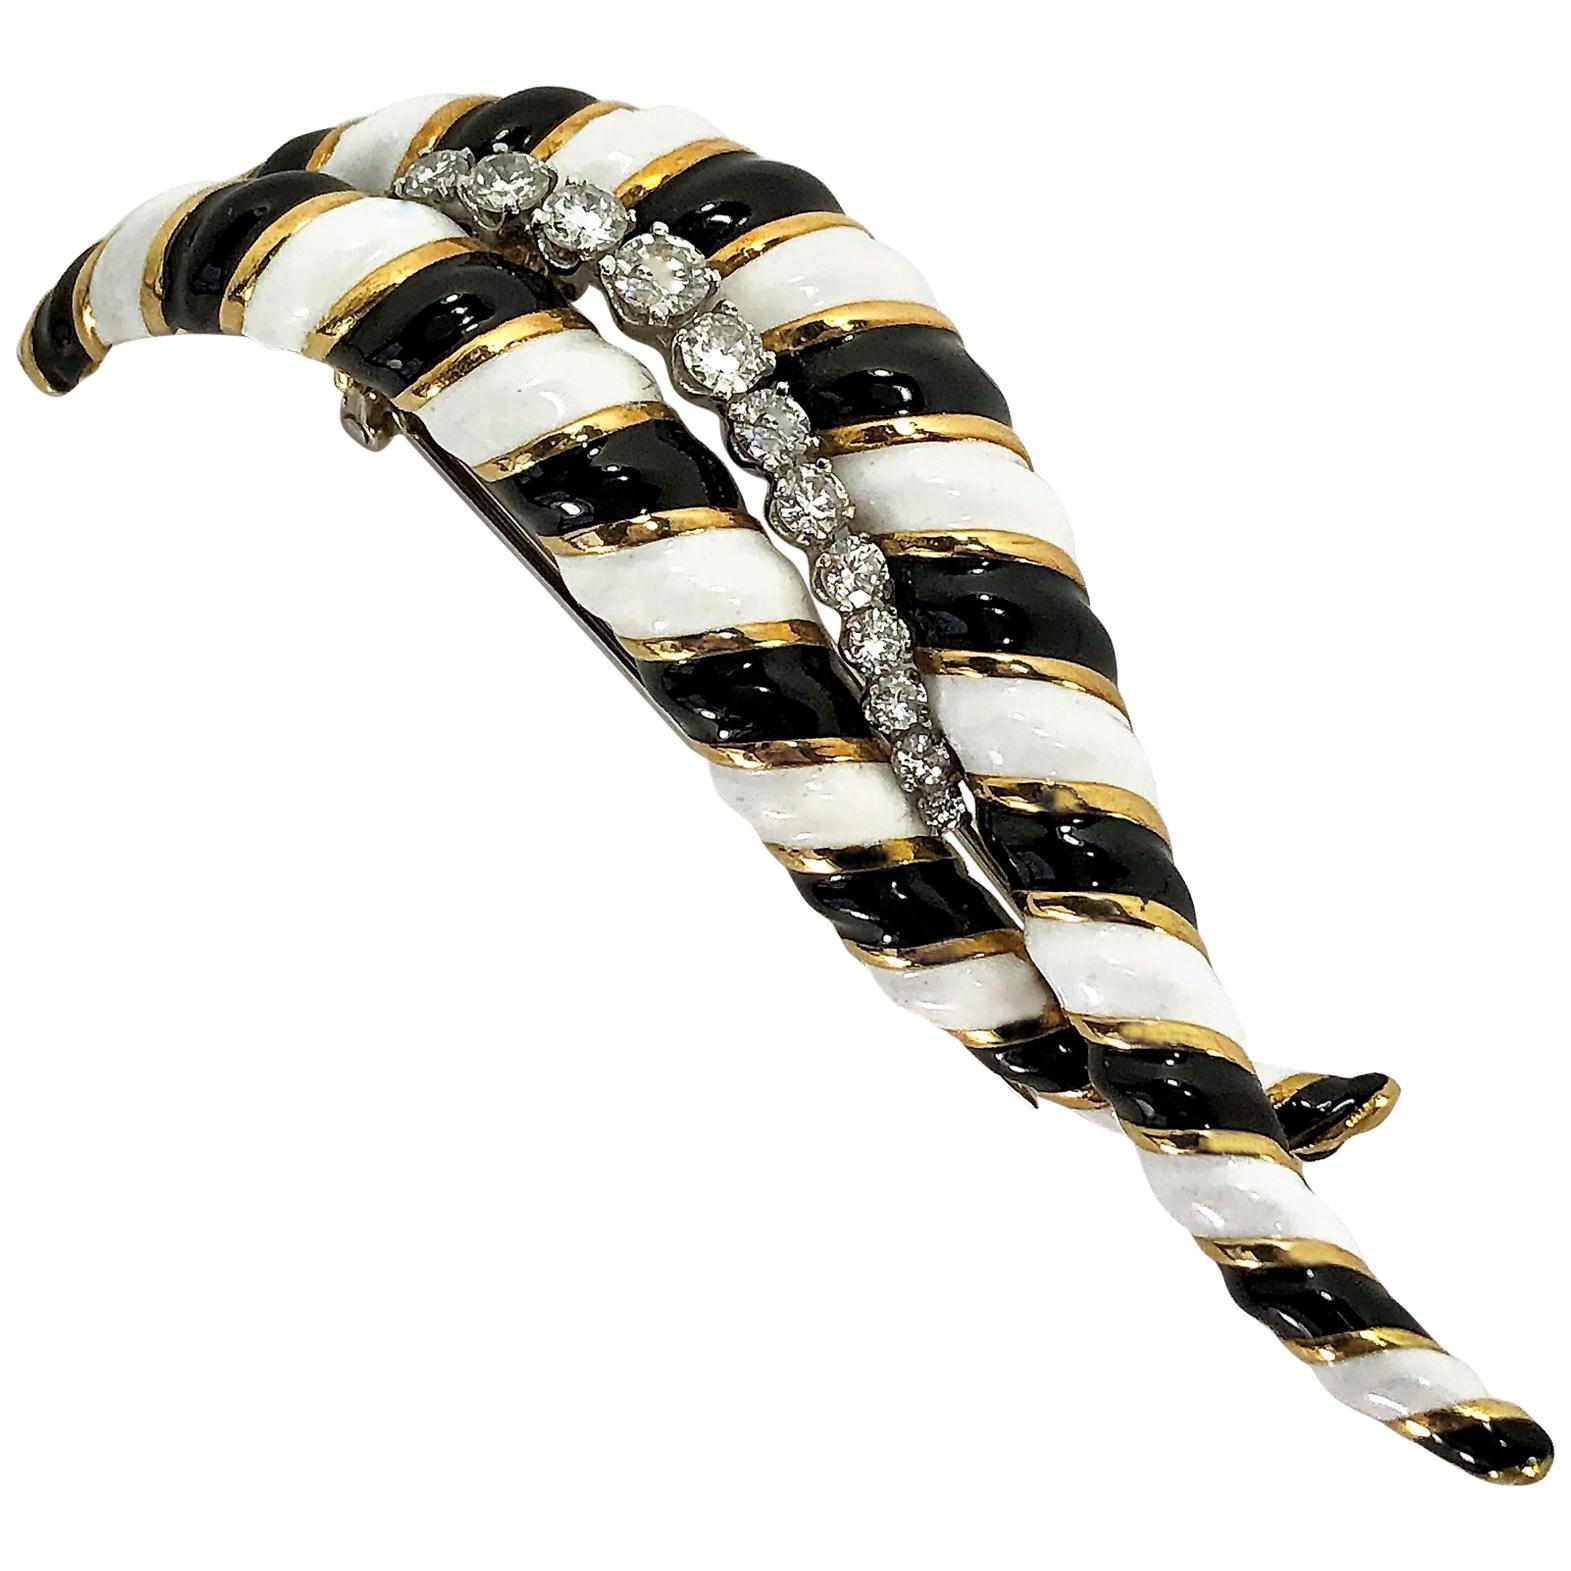 Large Scale Black and White Enamel Striped Gold Brooch with Diamonds